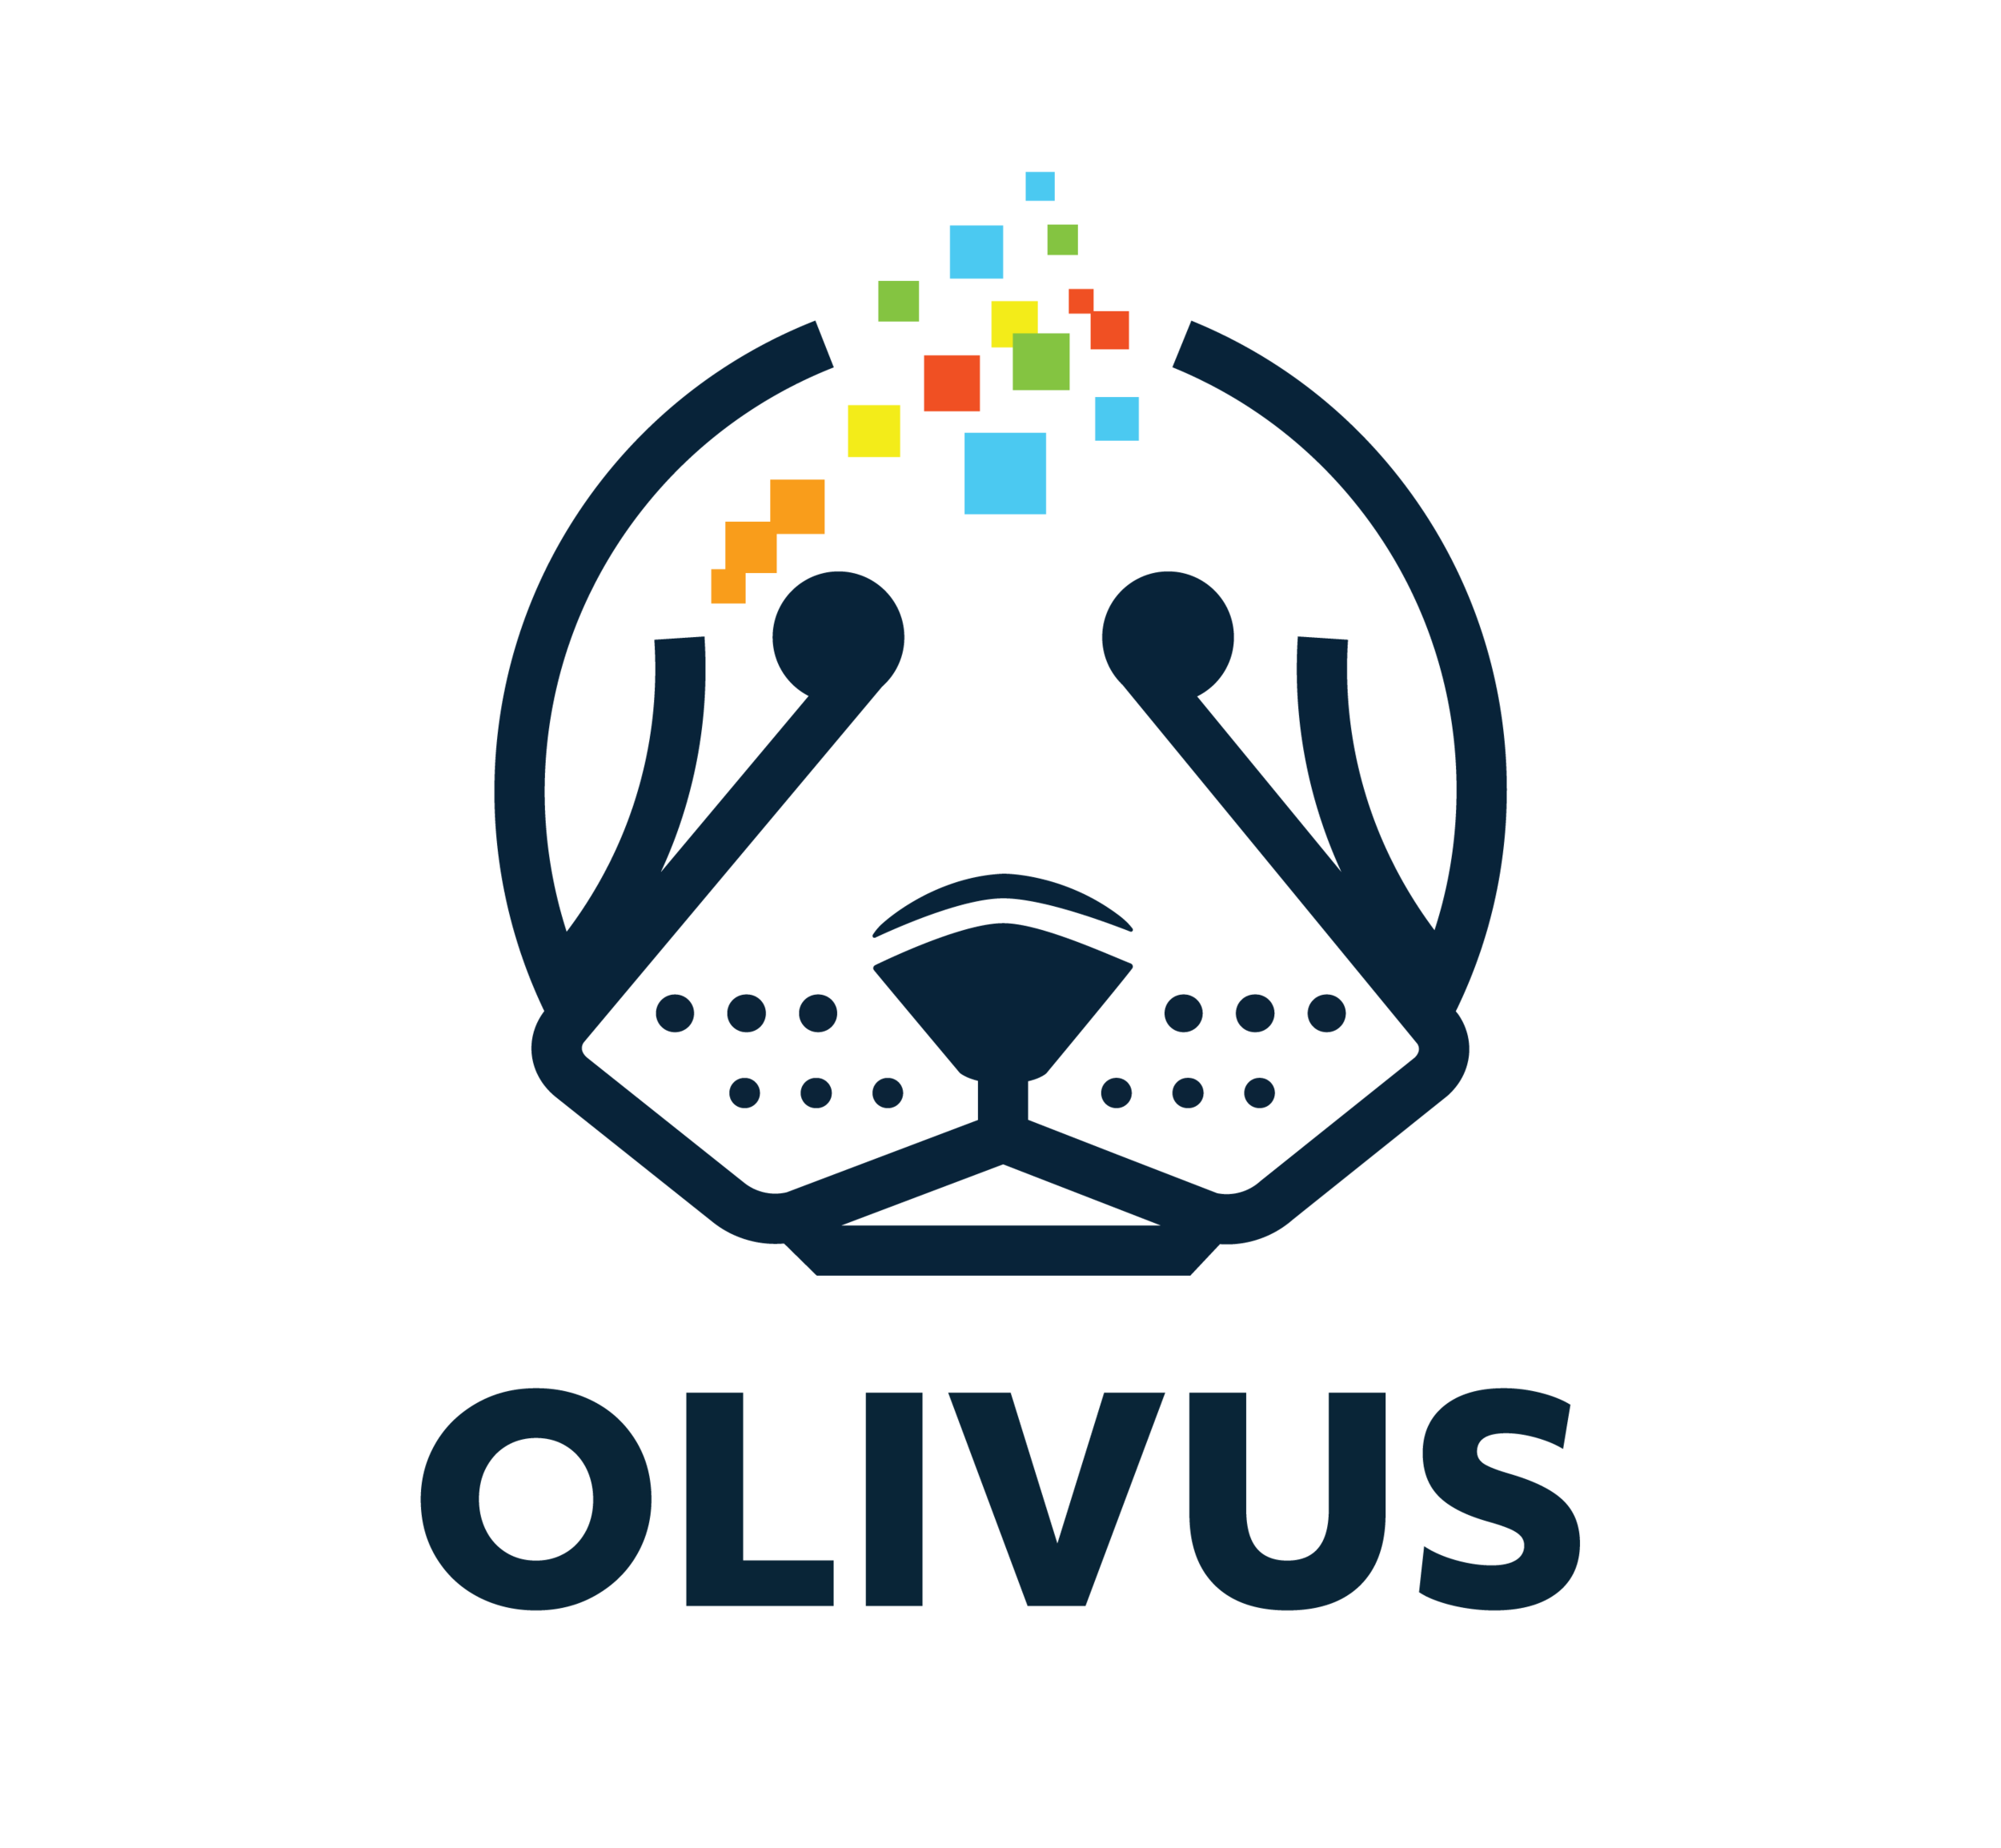 OLIVUS-visualIdentity-FINAL-color-blackwhite-greyscale_Olivus-color.png